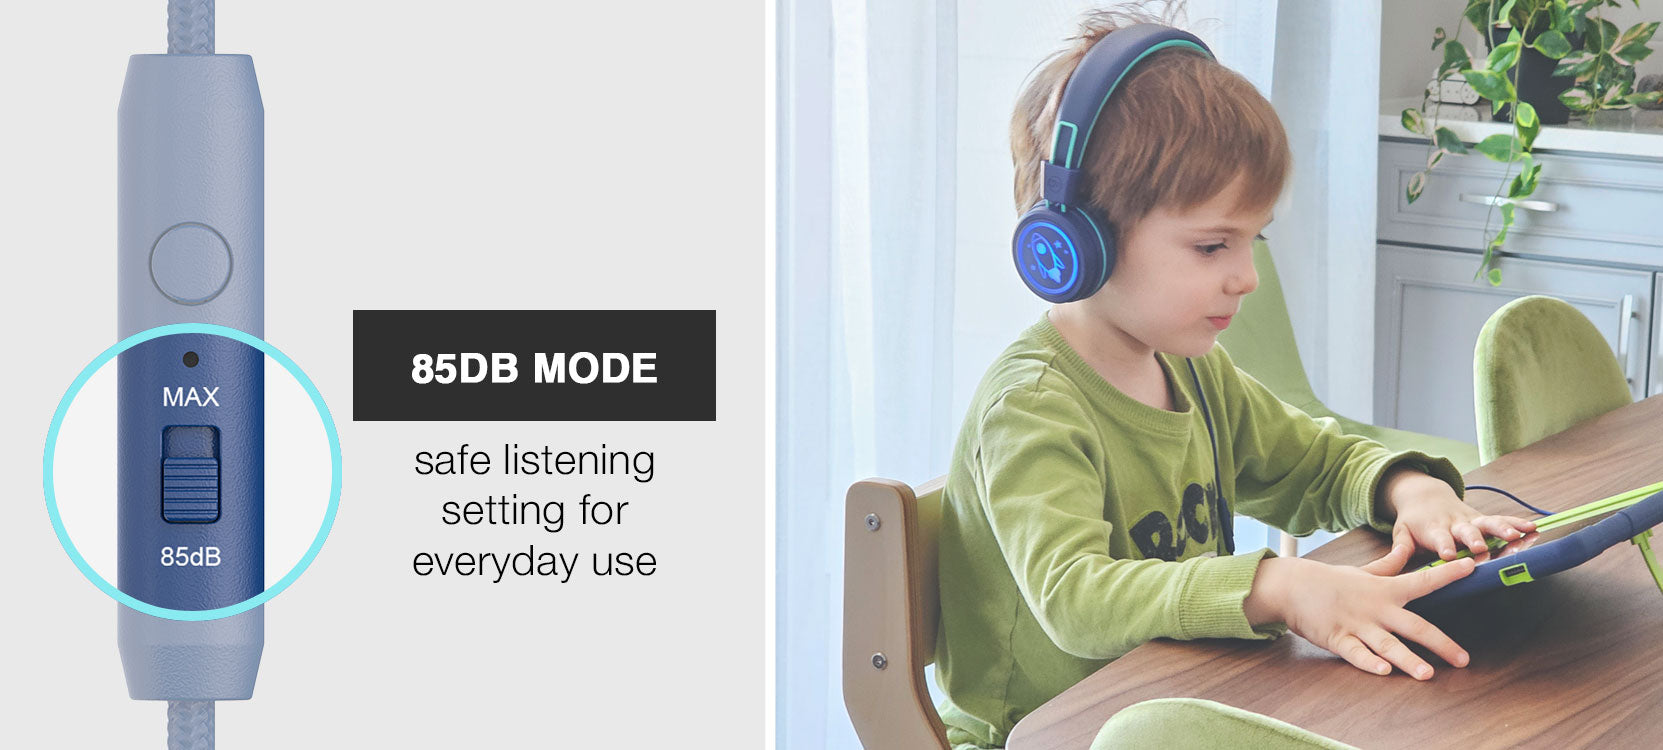 An image featuring a volume control dial marked '85db' and a young child wearing headphones while using a tablet at a table, highlighting a safe listening mode for everyday use.